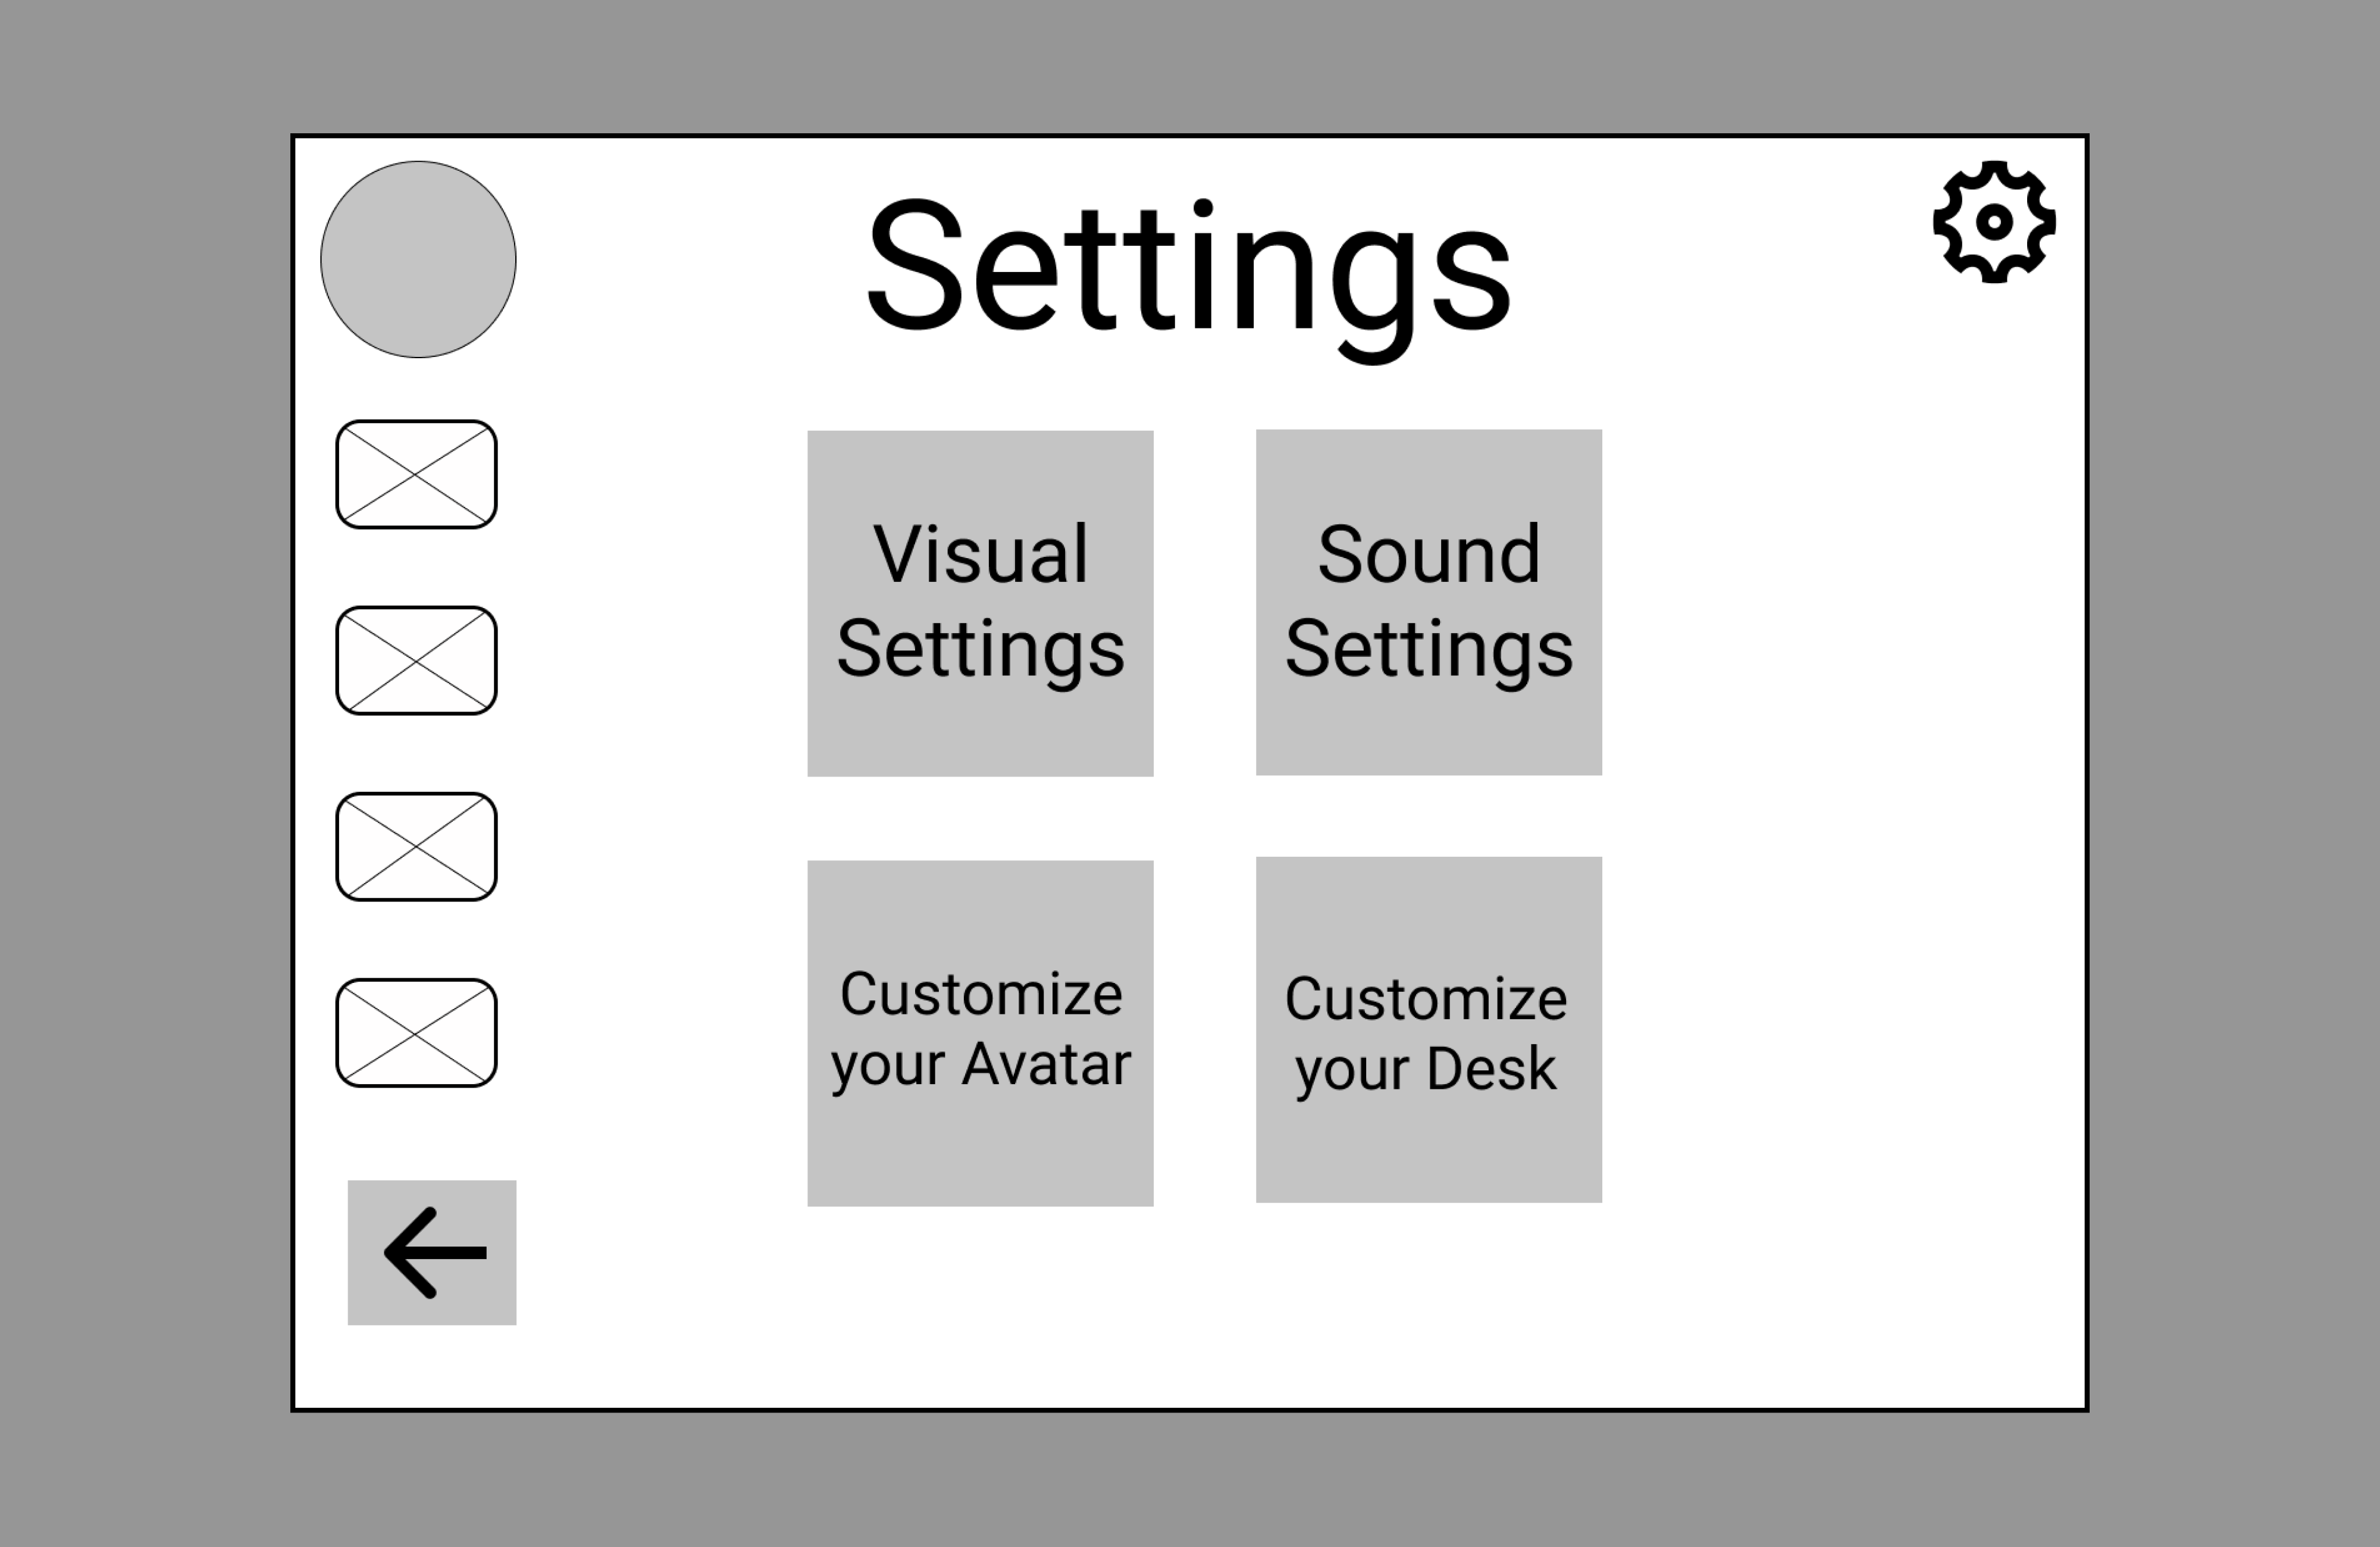 Wireframe for the cyberclass settings view